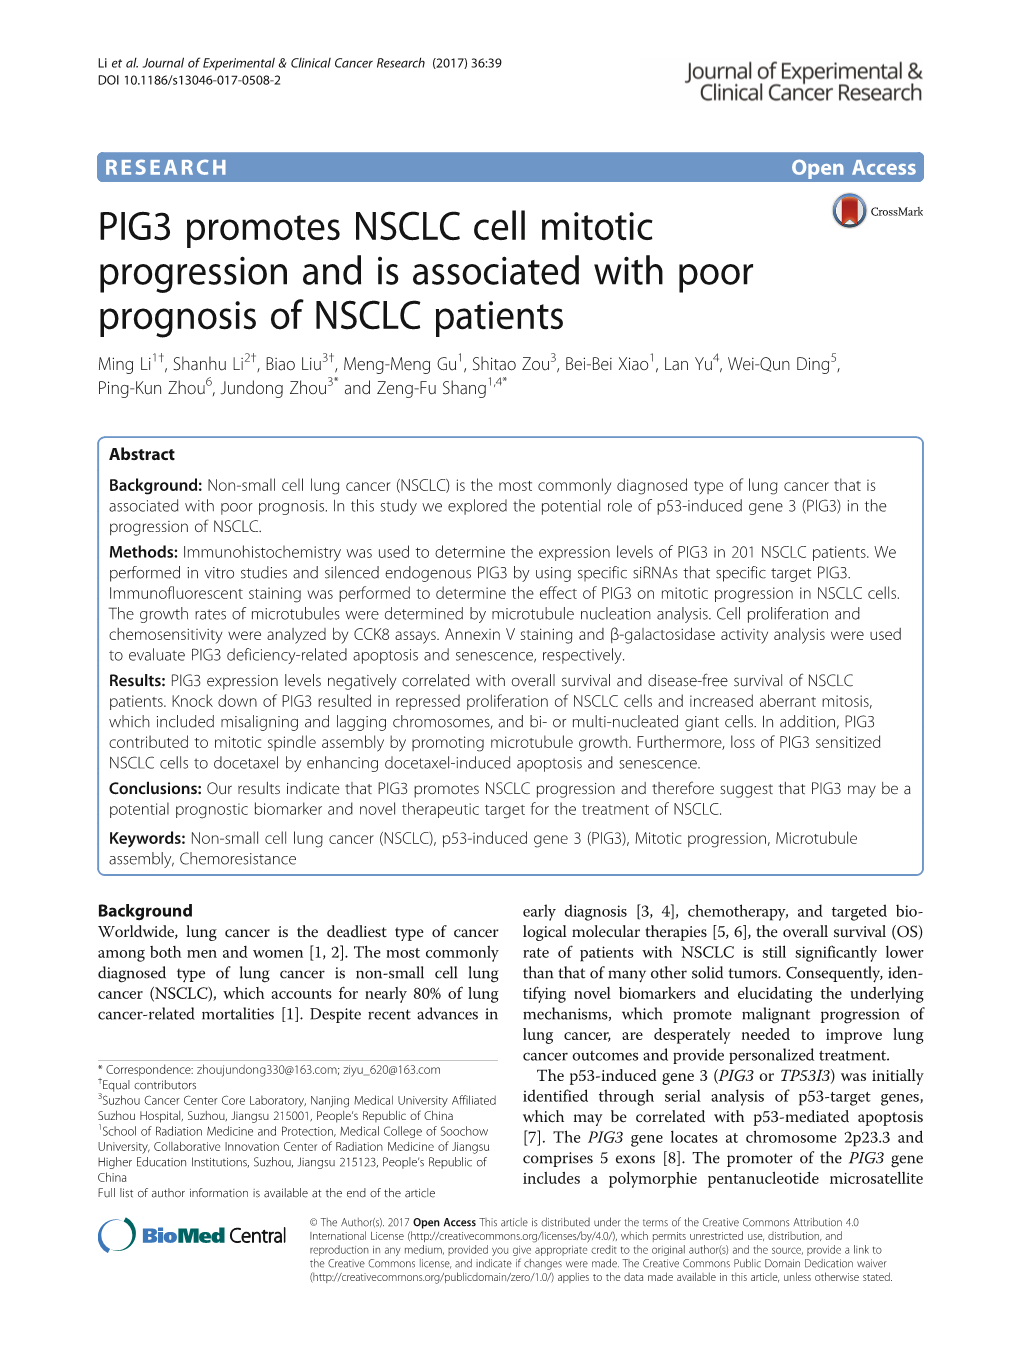 PIG3 Promotes NSCLC Cell Mitotic Progression and Is Associated with Poor Prognosis of NSCLC Patients